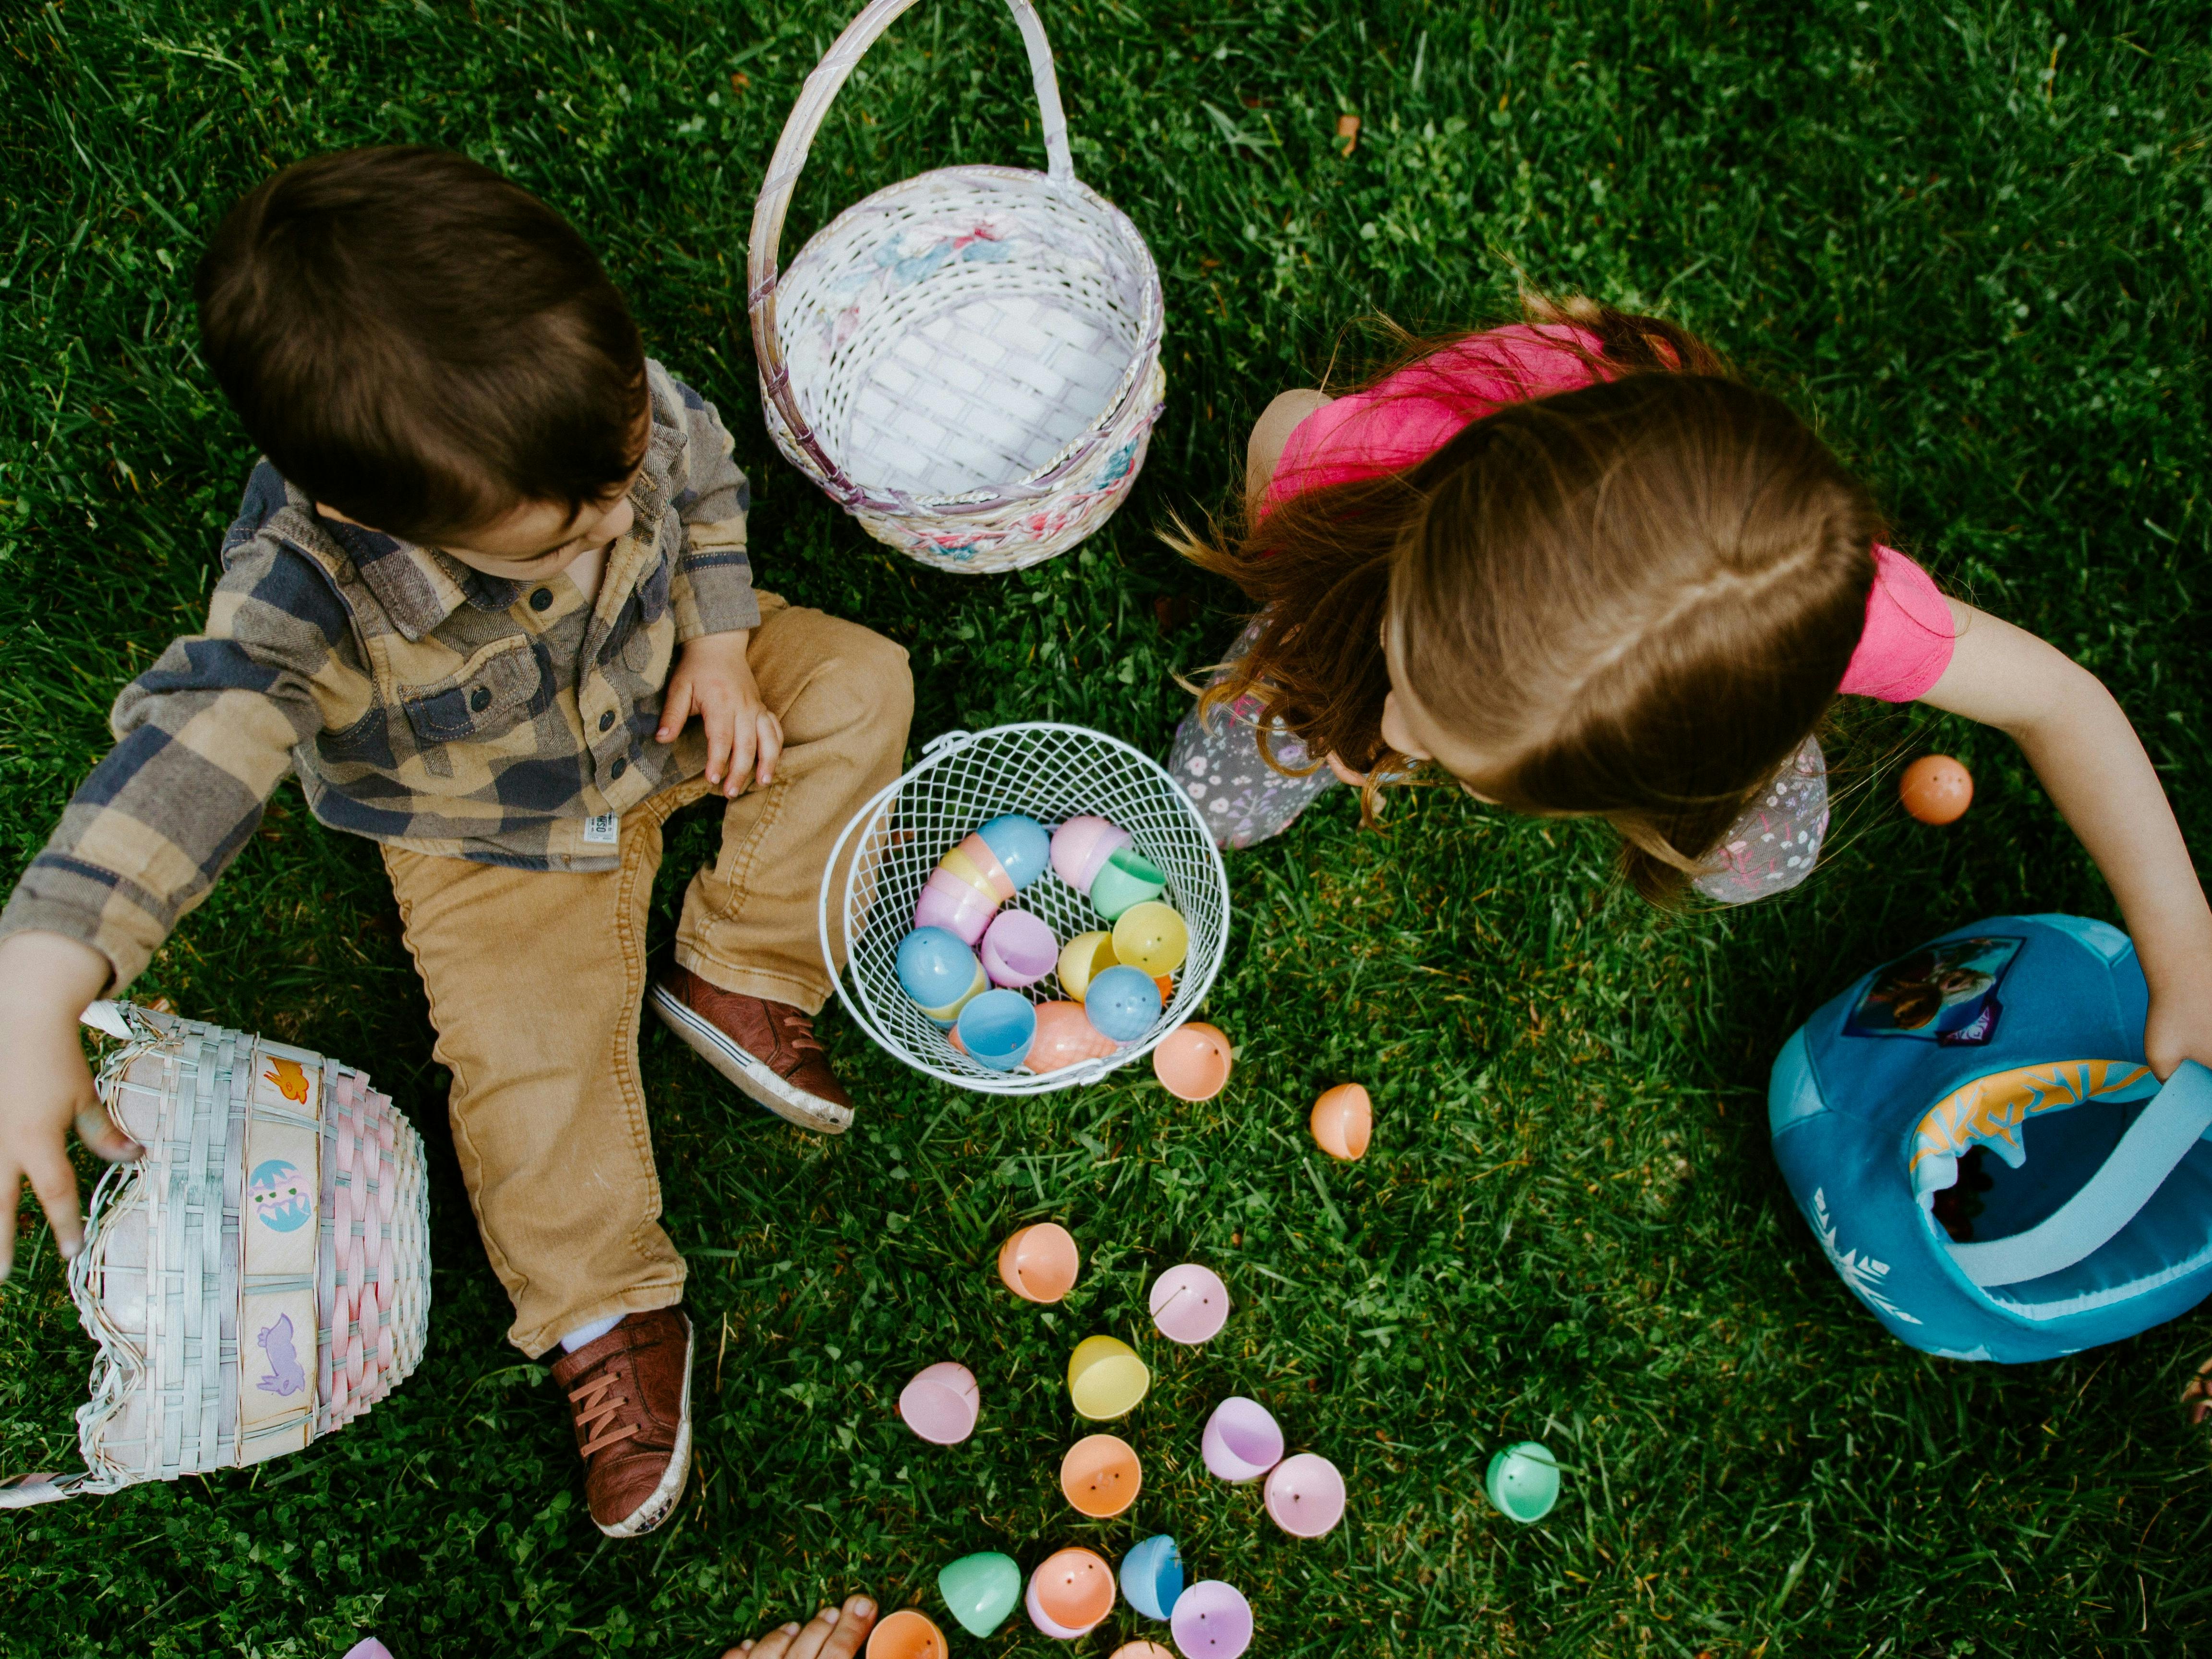 Photograph of two children with easter eggs and baskets